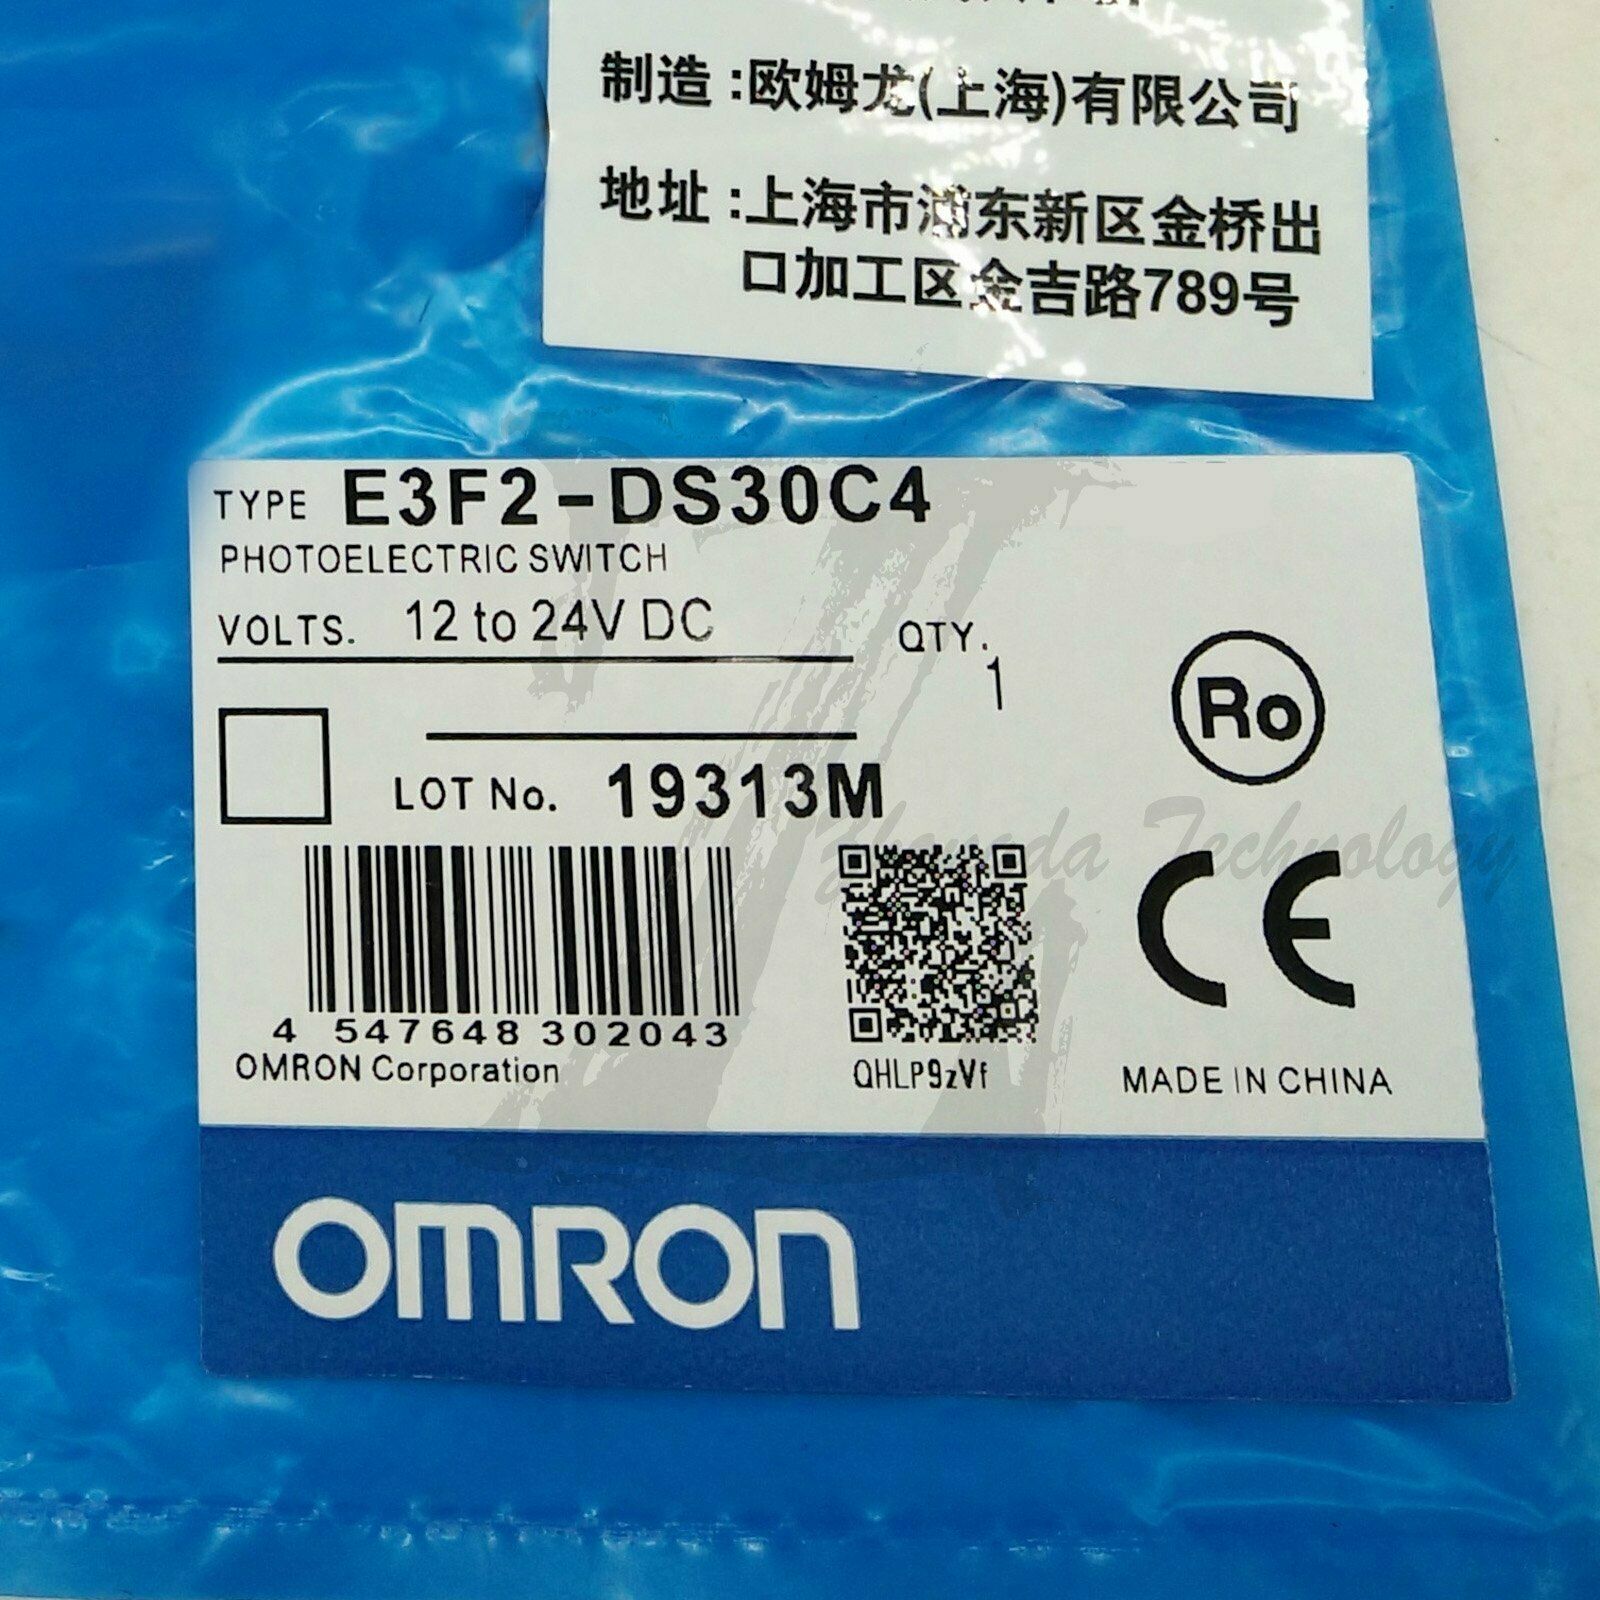 1PC new Omron E3F2-DS30C4 module one year warranty KOEED 1, 80%, import_2020_10_10_031751, Omron, Other